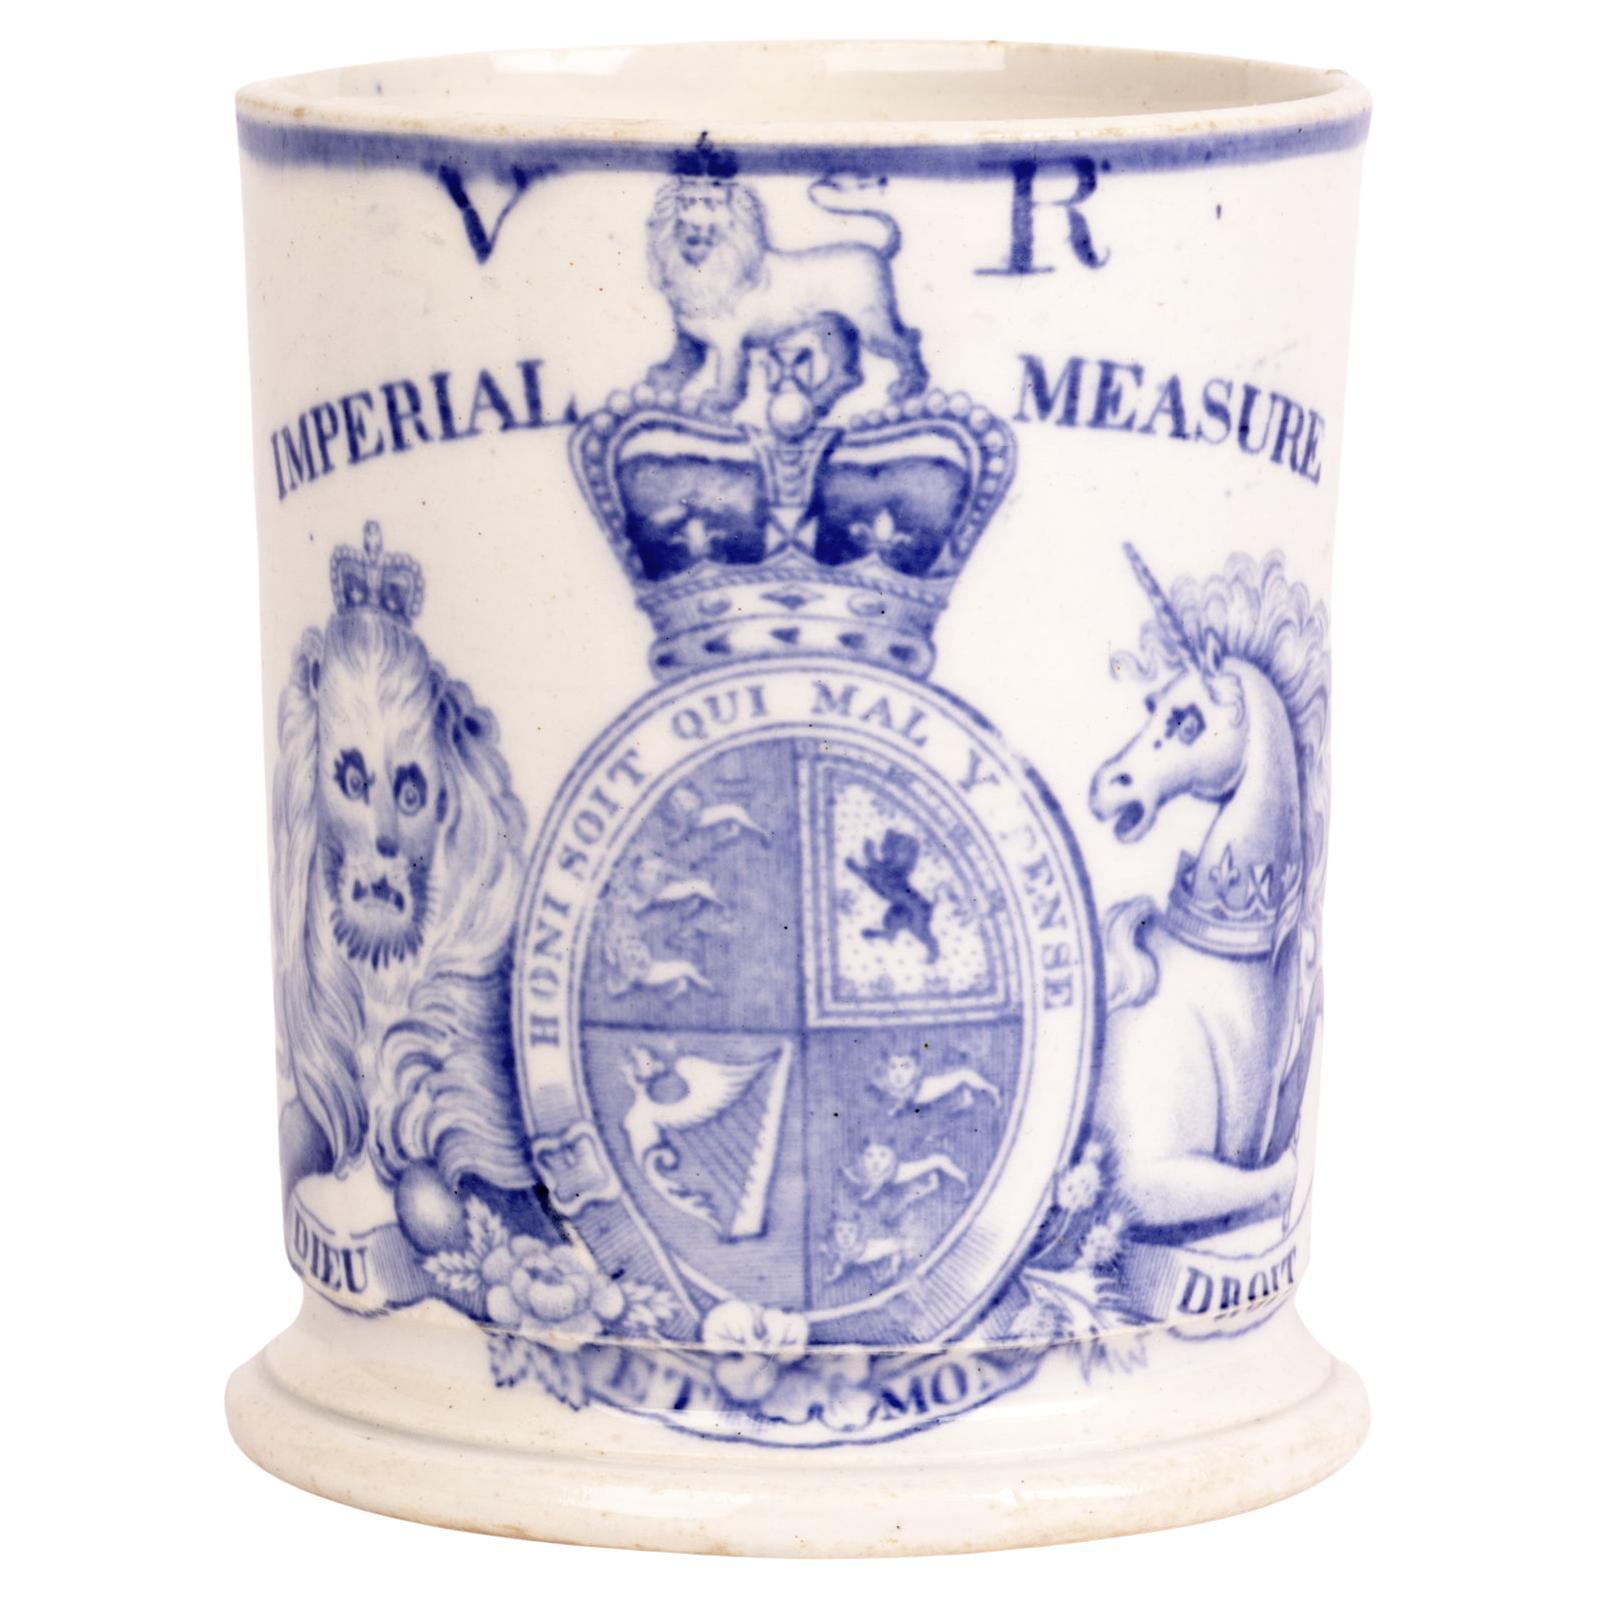 Davenport Rare Early Victorian Imperial Measure Printed Pottery Mug 